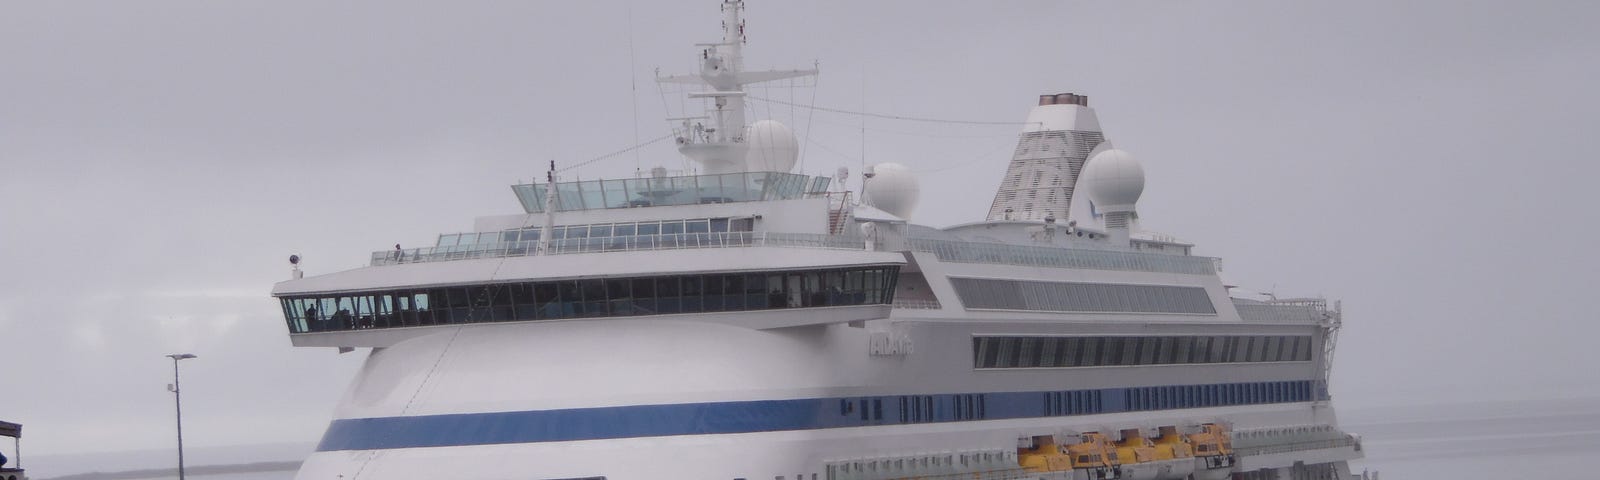 A mid-sized luxury cruise ship with rakish lines and a modern abstract paint job (squiggly zigzags, big eyes, and big pouty red lips painted on the bow) berths in Iceland.